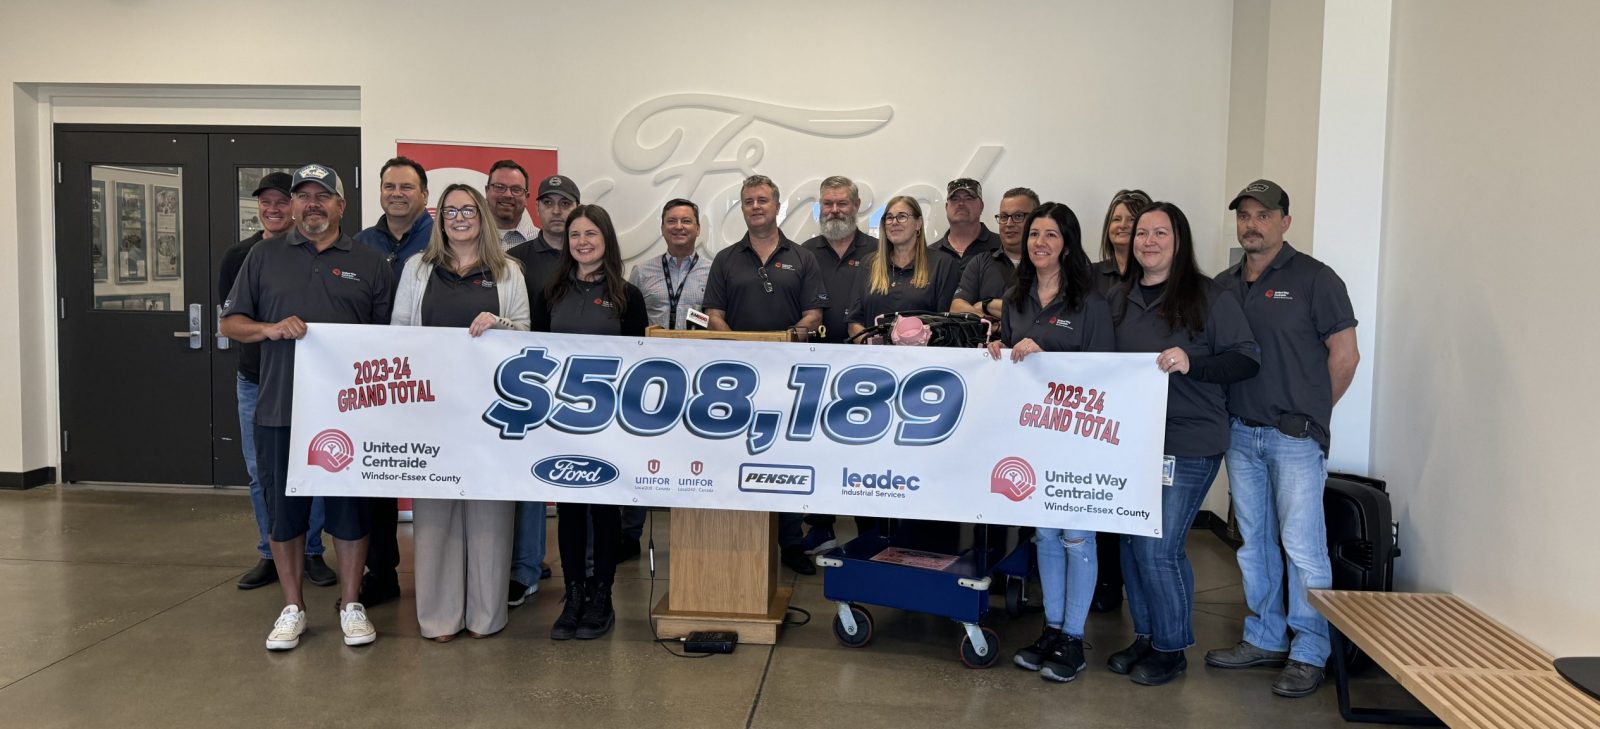 Ford Windsor Operations, UNIFOR Locals 200 & 240,business partners raise $508,189 in support of United Way Post Featured Image